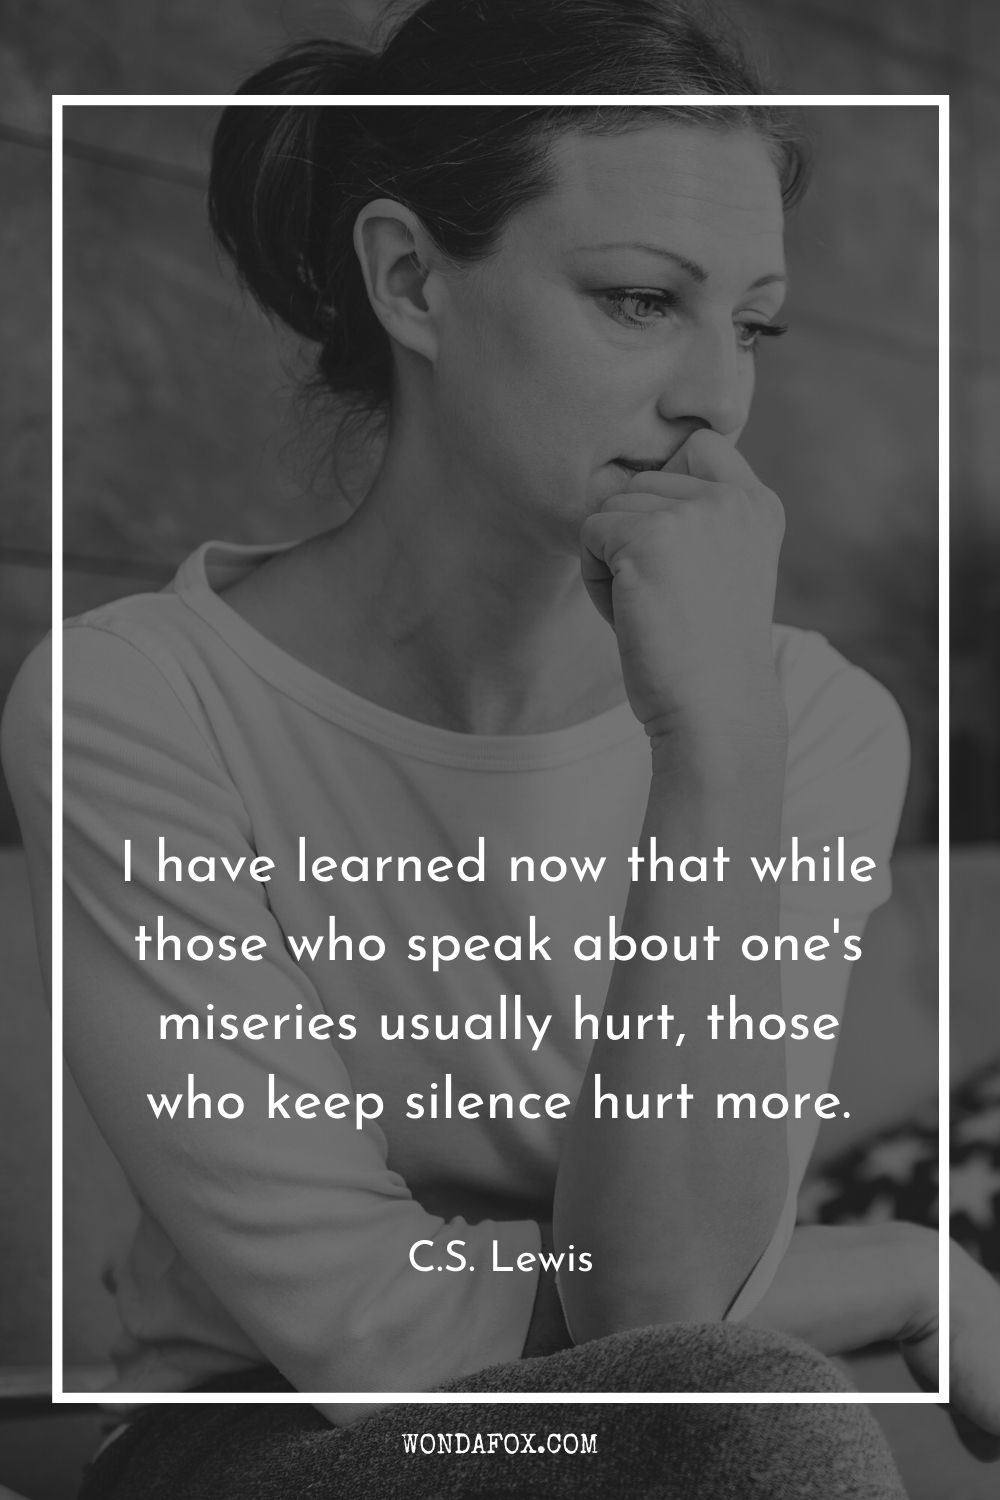 I have learned now that while those who speak about one's miseries usually hurt, those who keep silence hurt more.